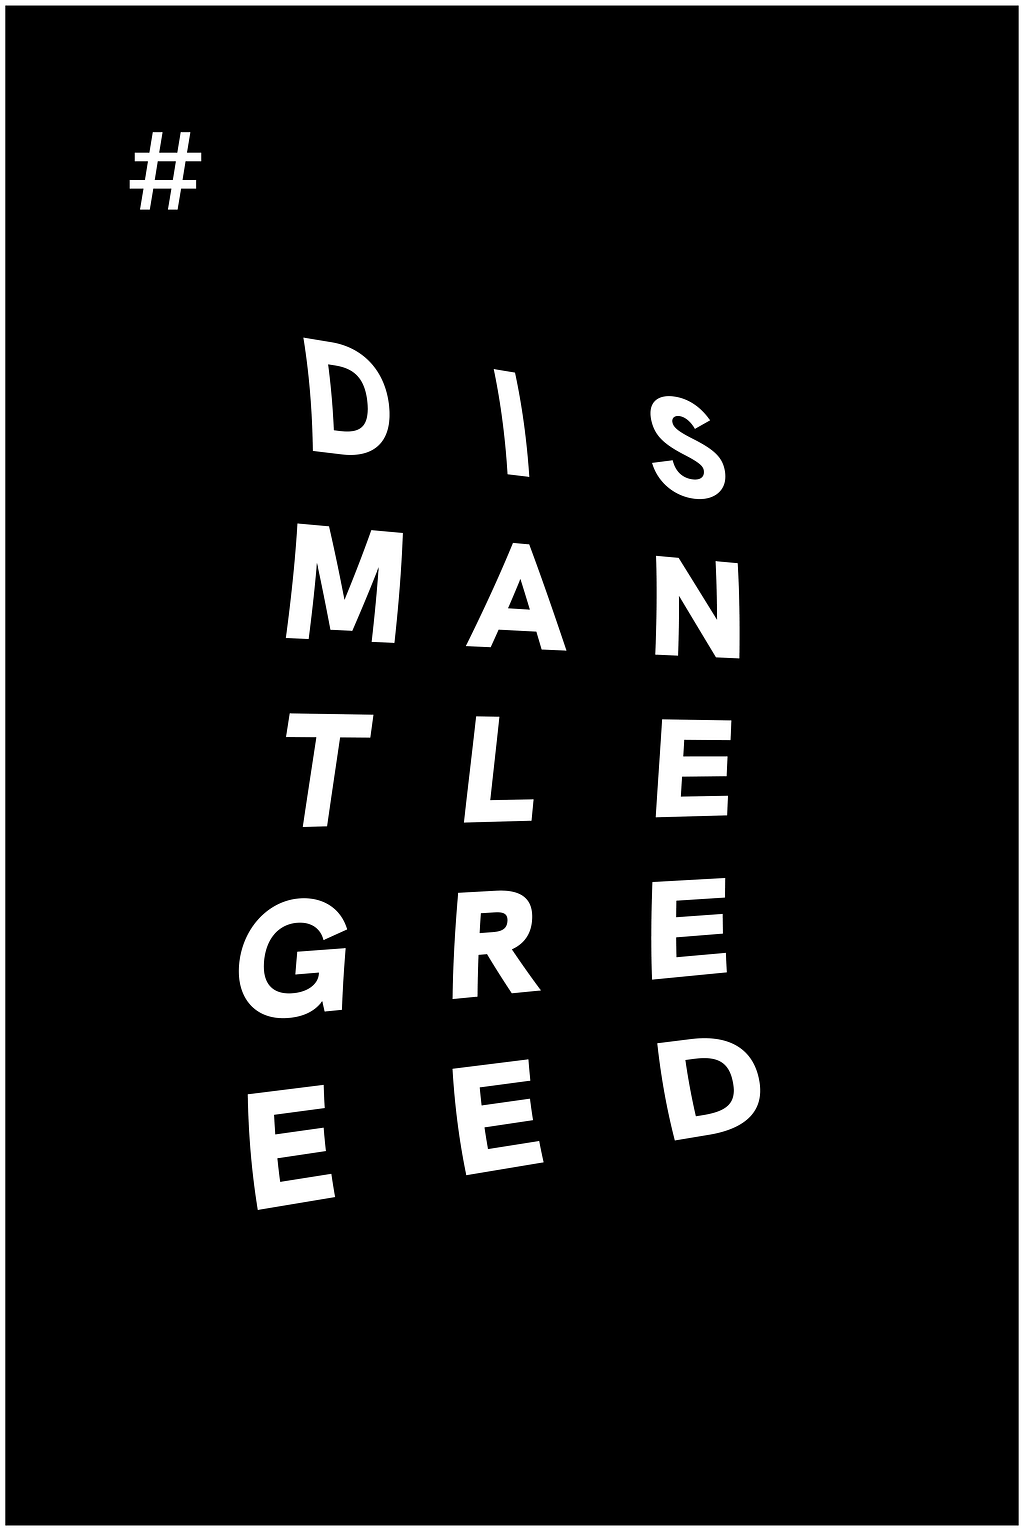 White lettering on black background: hashtag “Dismantle greed.”